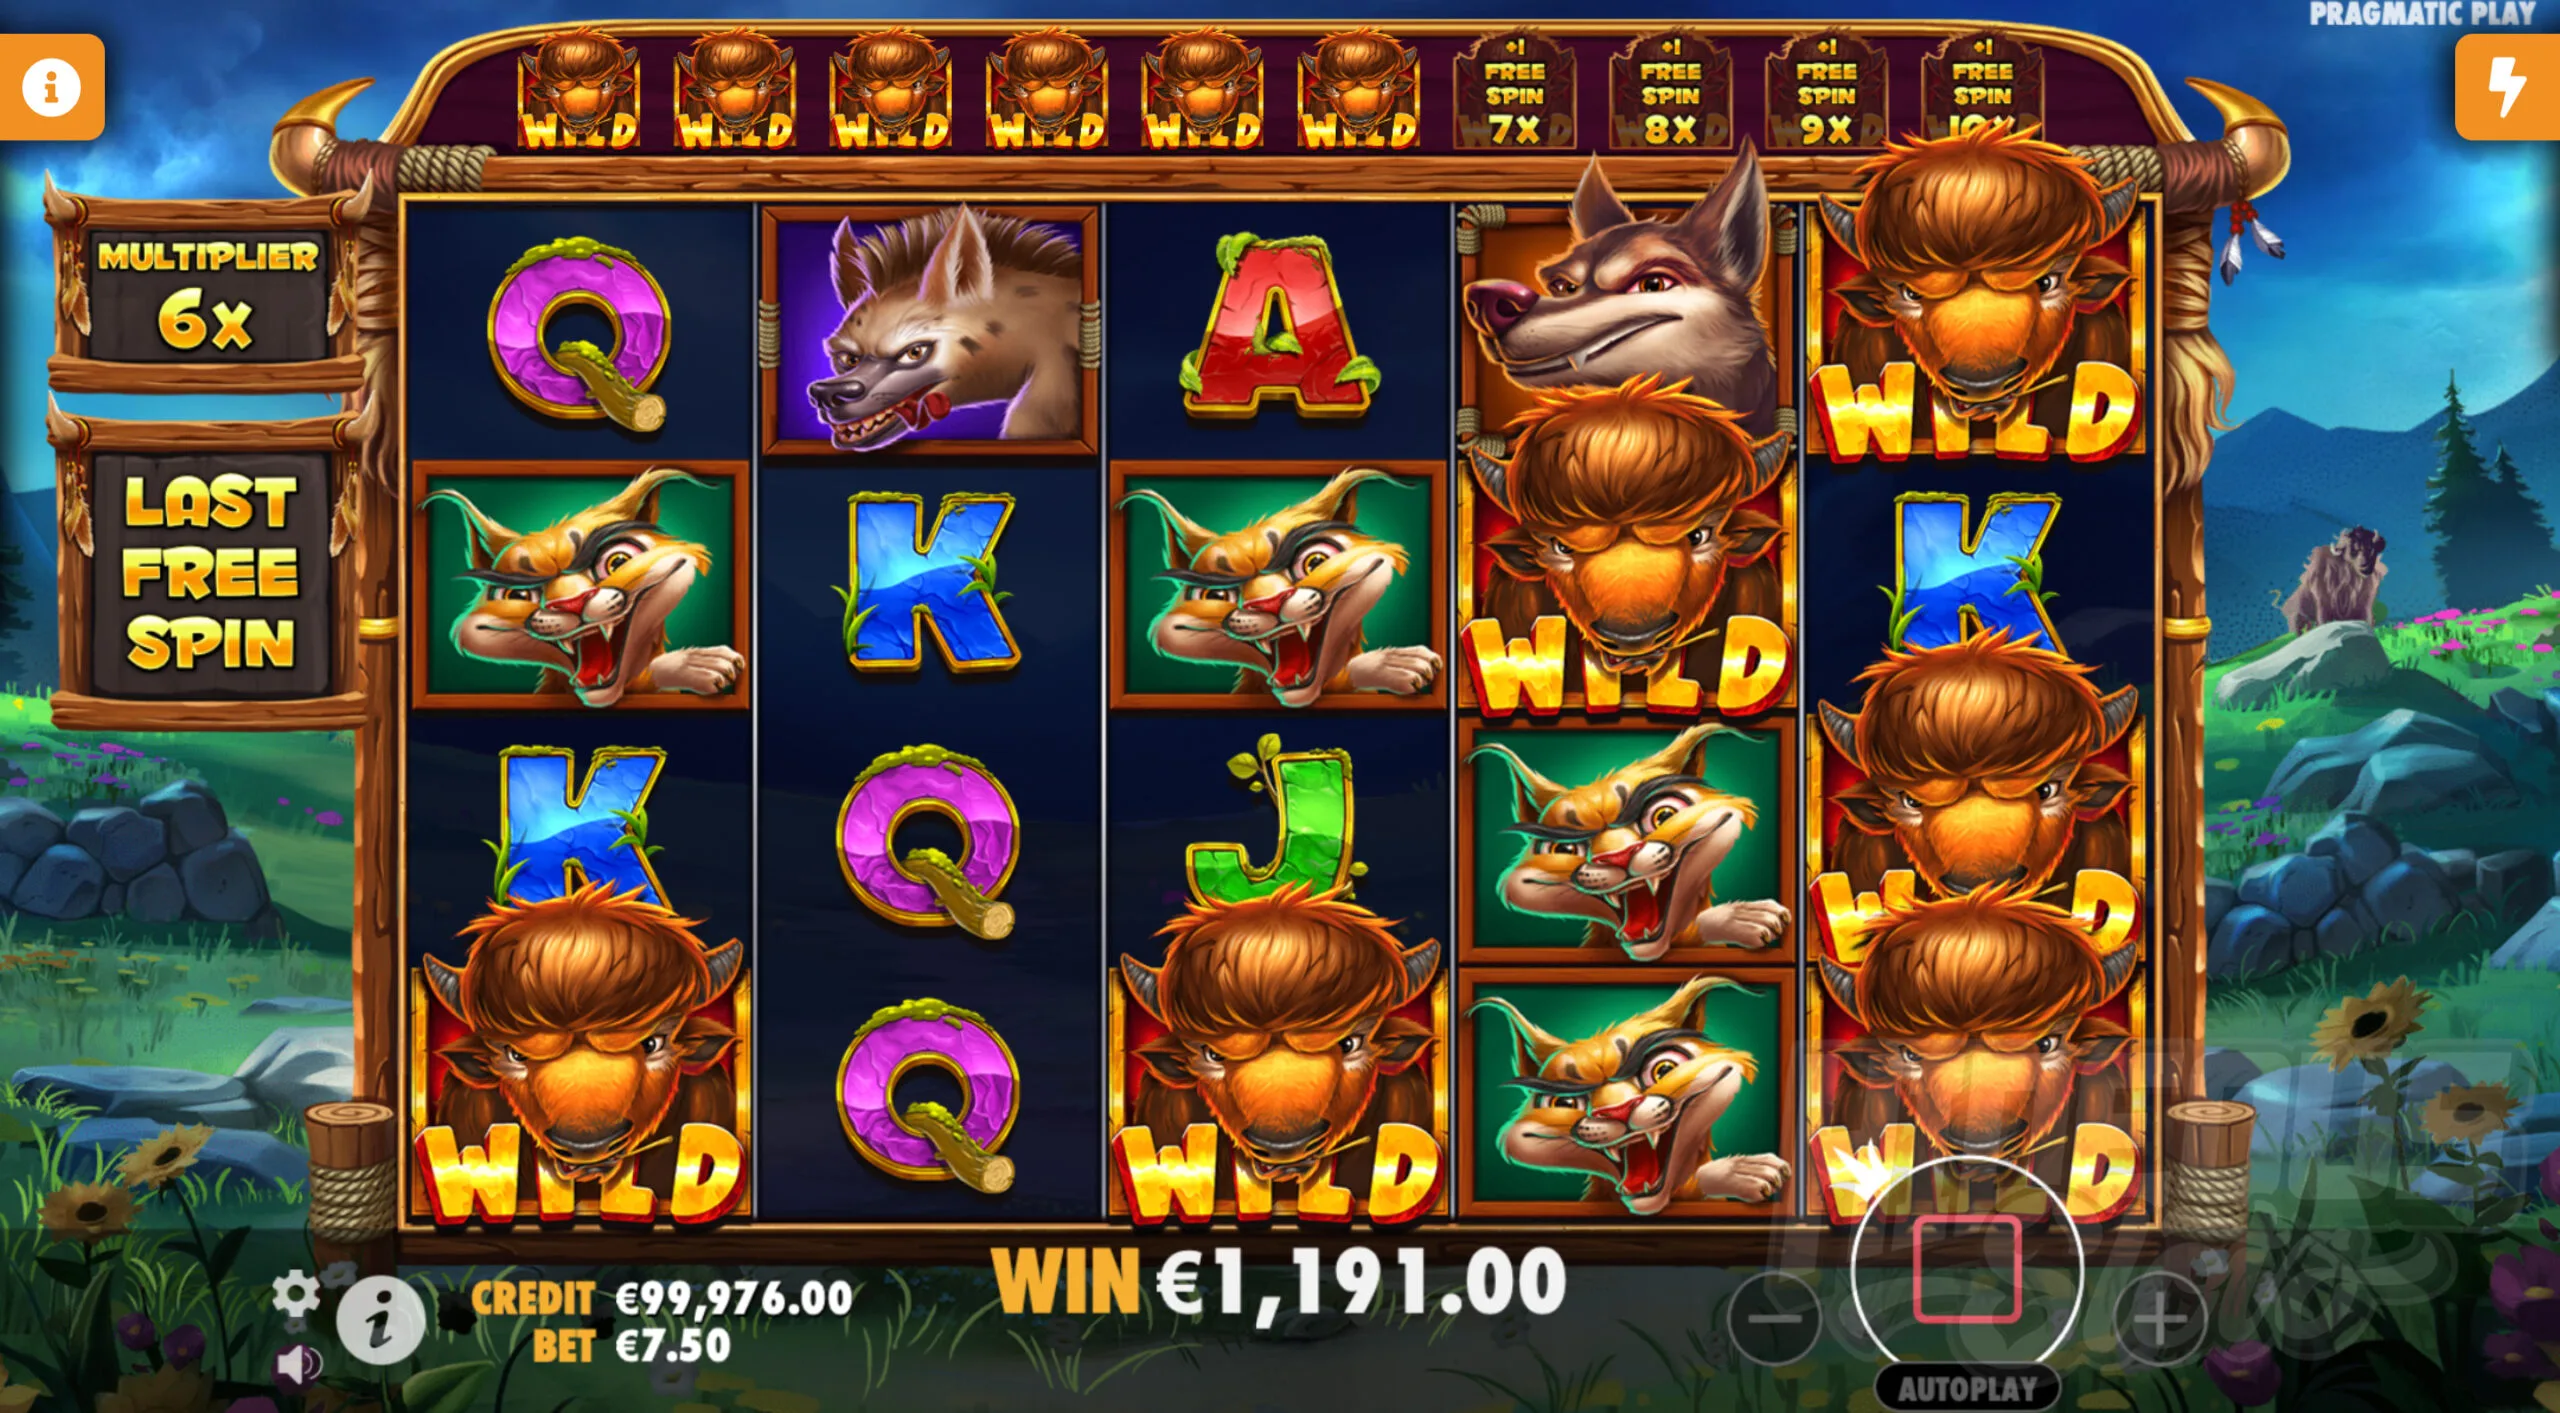 Release the Bison Free Spins